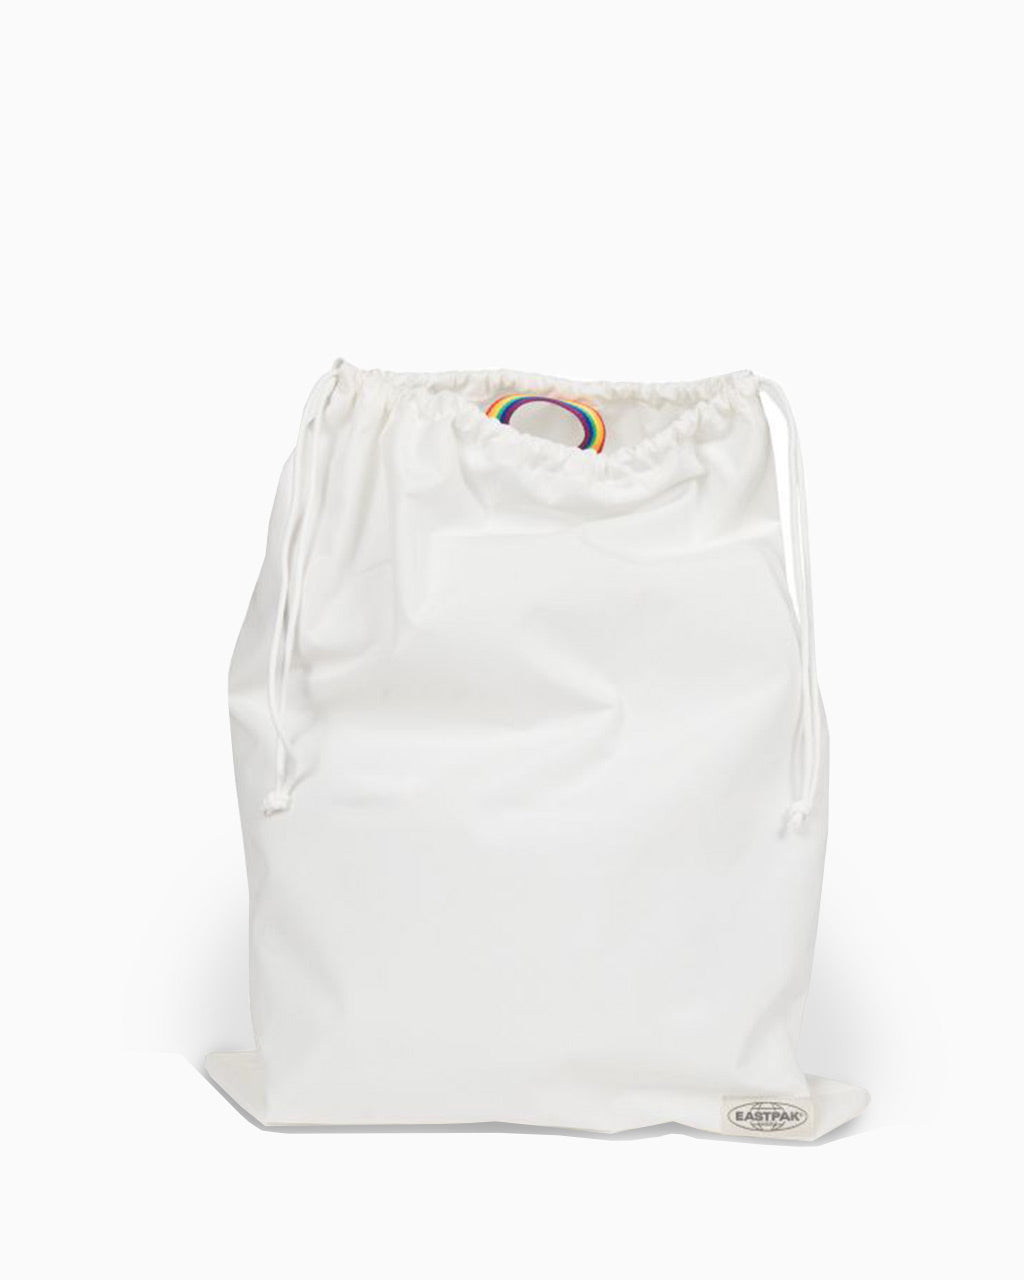 Sac East Pack Stand - Accessoires EASTPAK